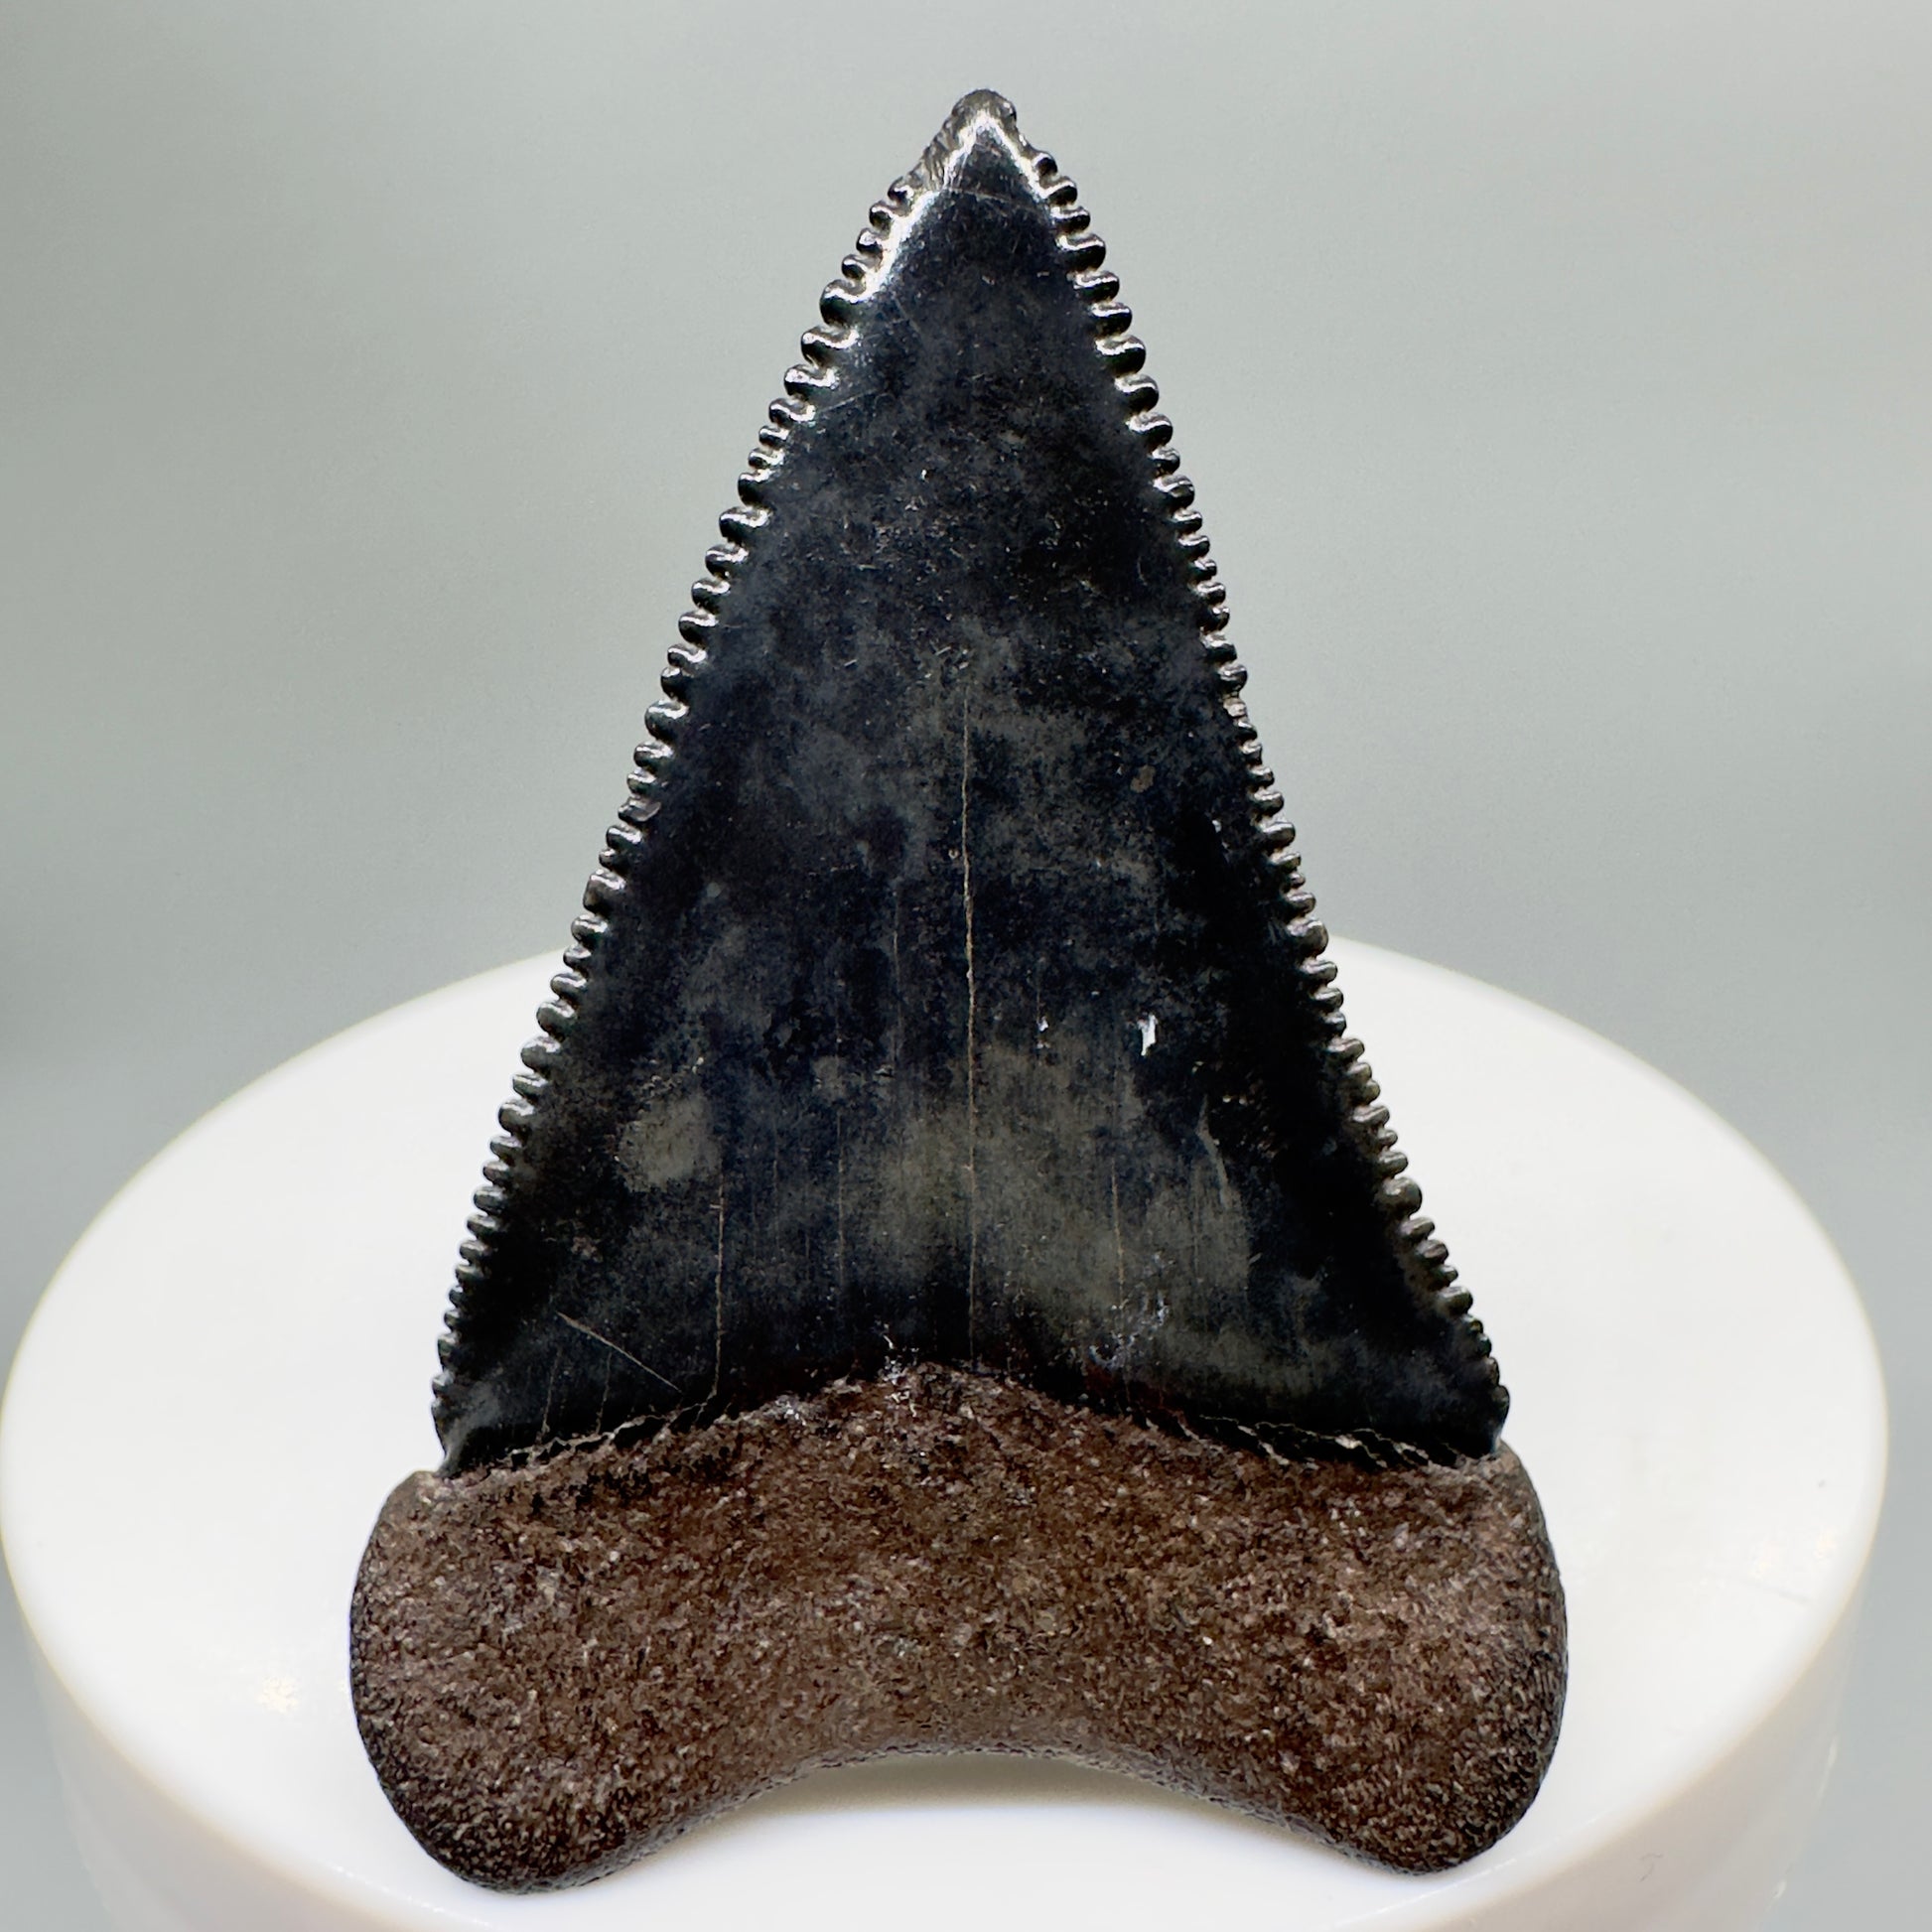 Colorful, sharply serrated 1.87" Fossil Great White Shark Tooth - South Carolina River GW1079 - Back